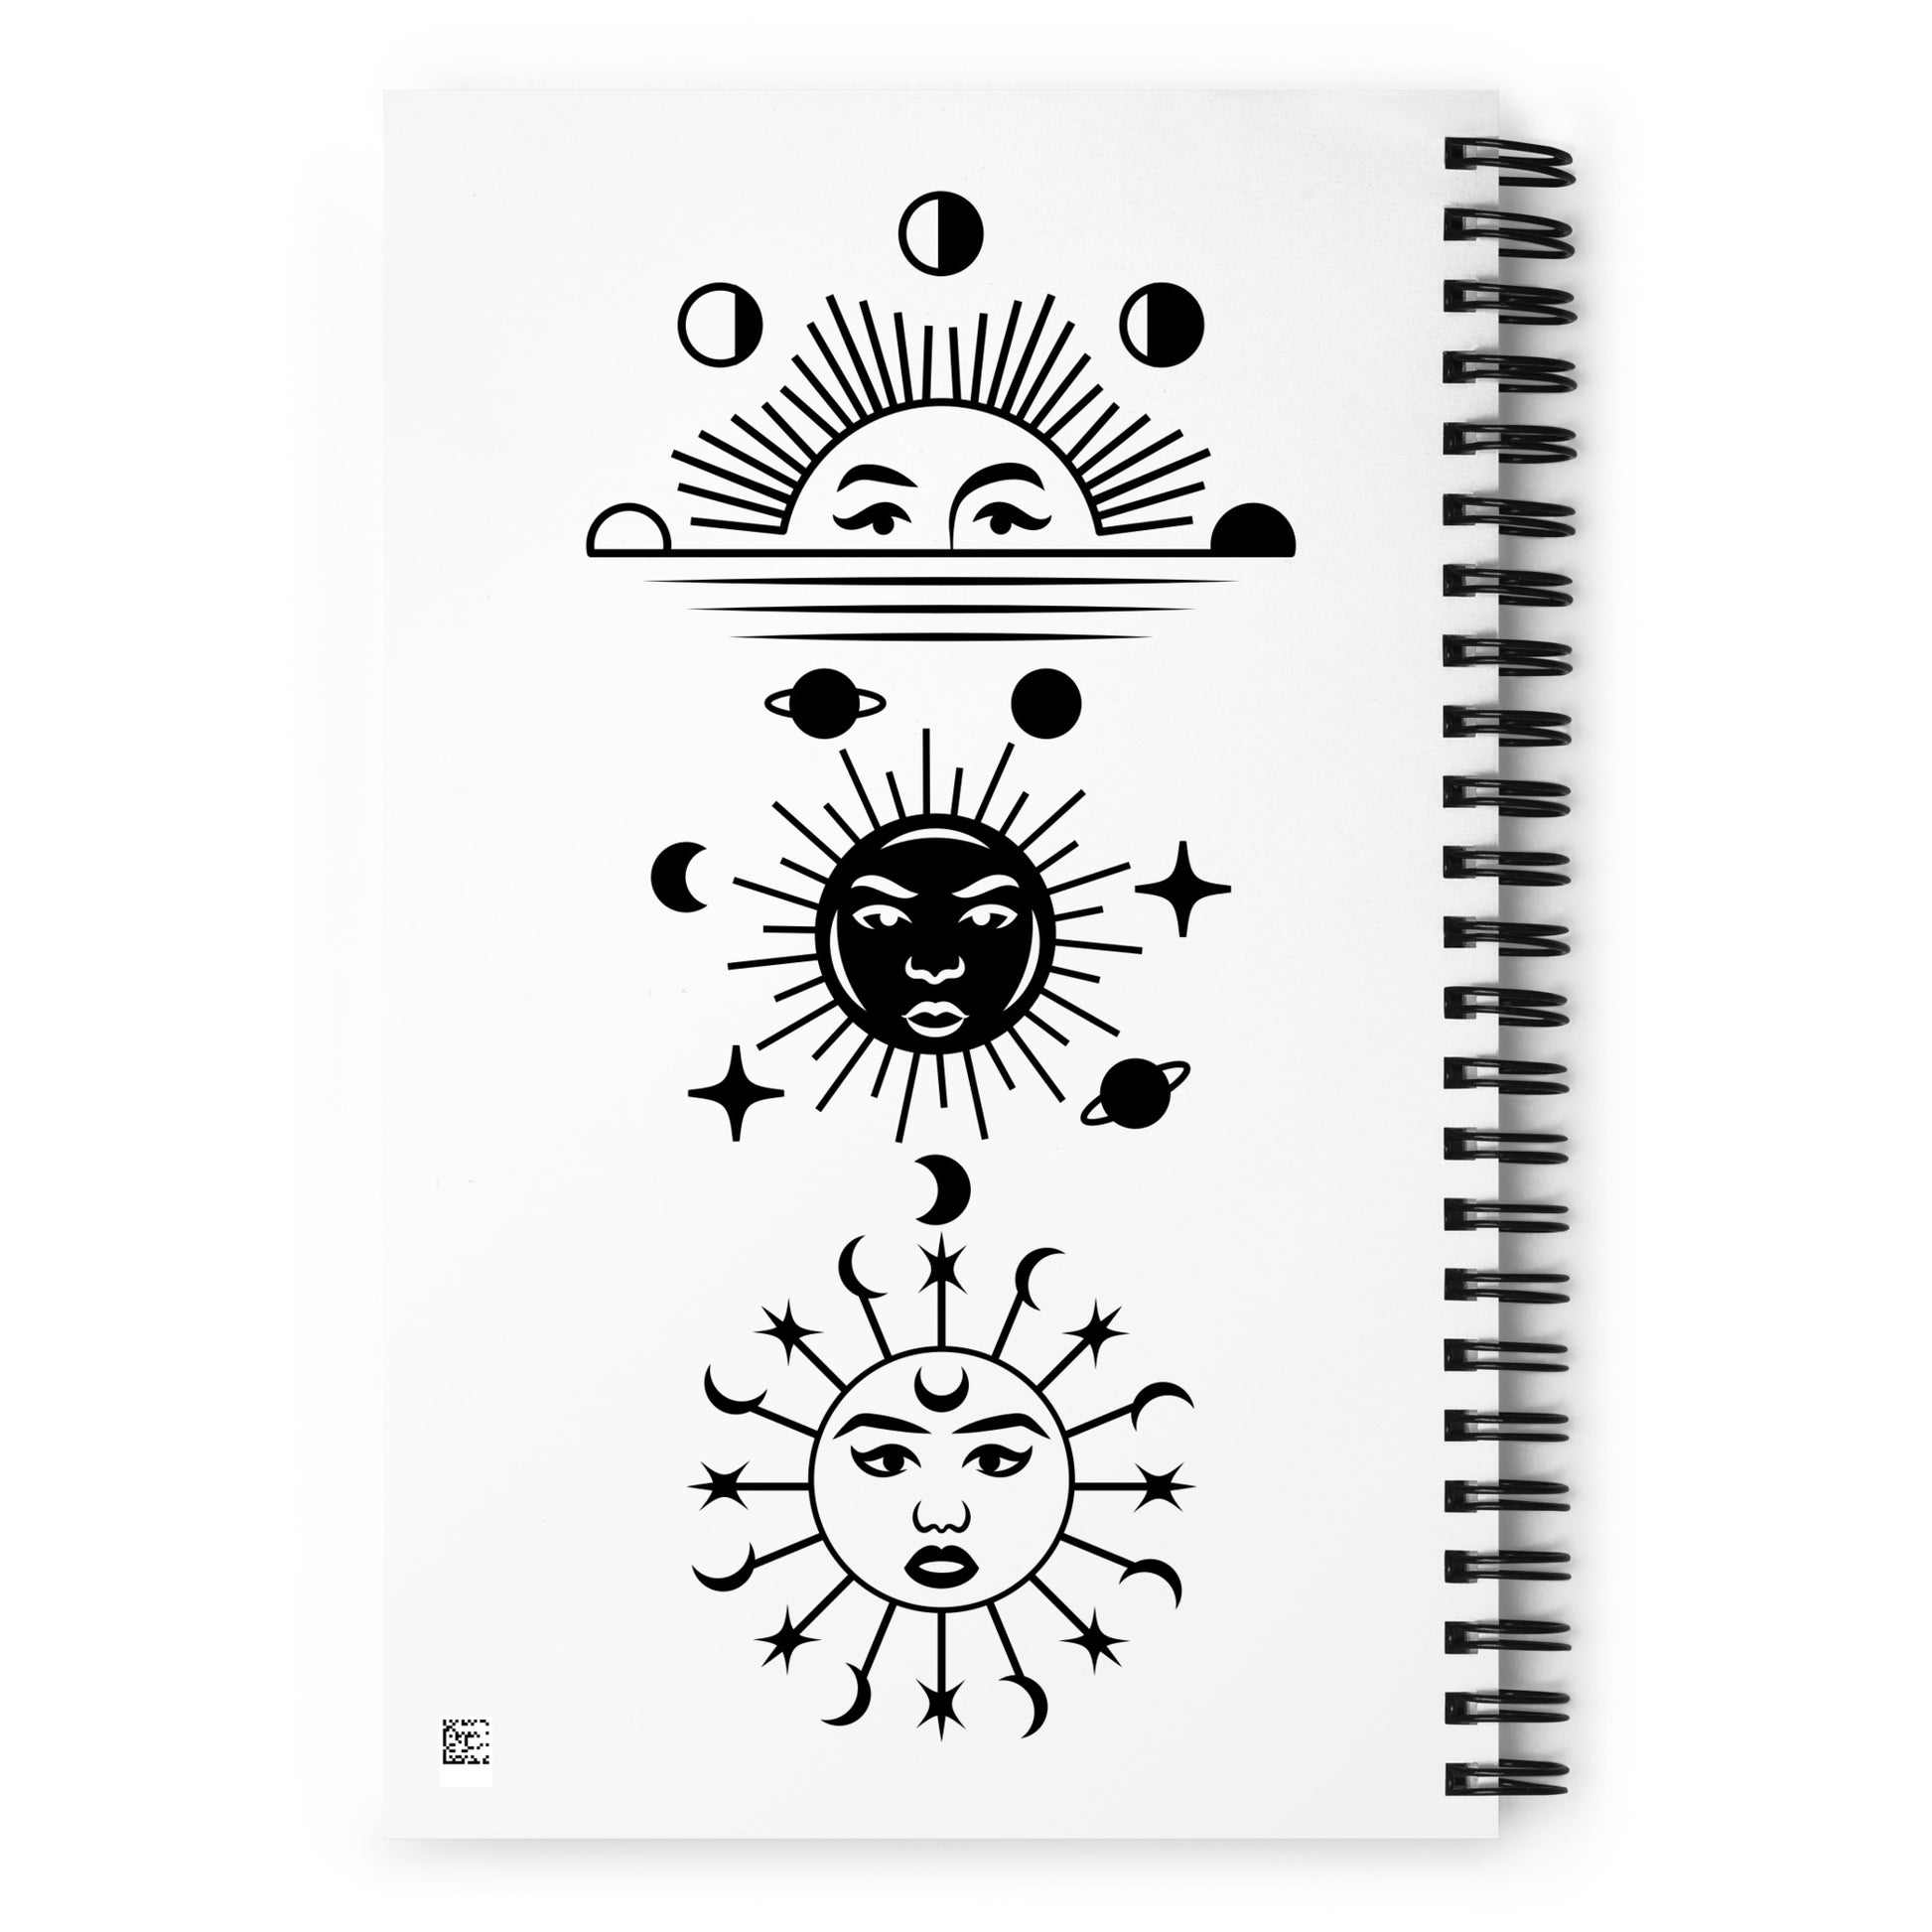 Manifesting journal/spiral notebook, back view. 140 dotted pages. 5.5 inches x 8.5 inches. Black and white images of moons in different phases, sun set, suns with faces, stars, and solar system planets. Jamilliah's Wisdom Is Timeless Shop - wisdomistimeless.com.